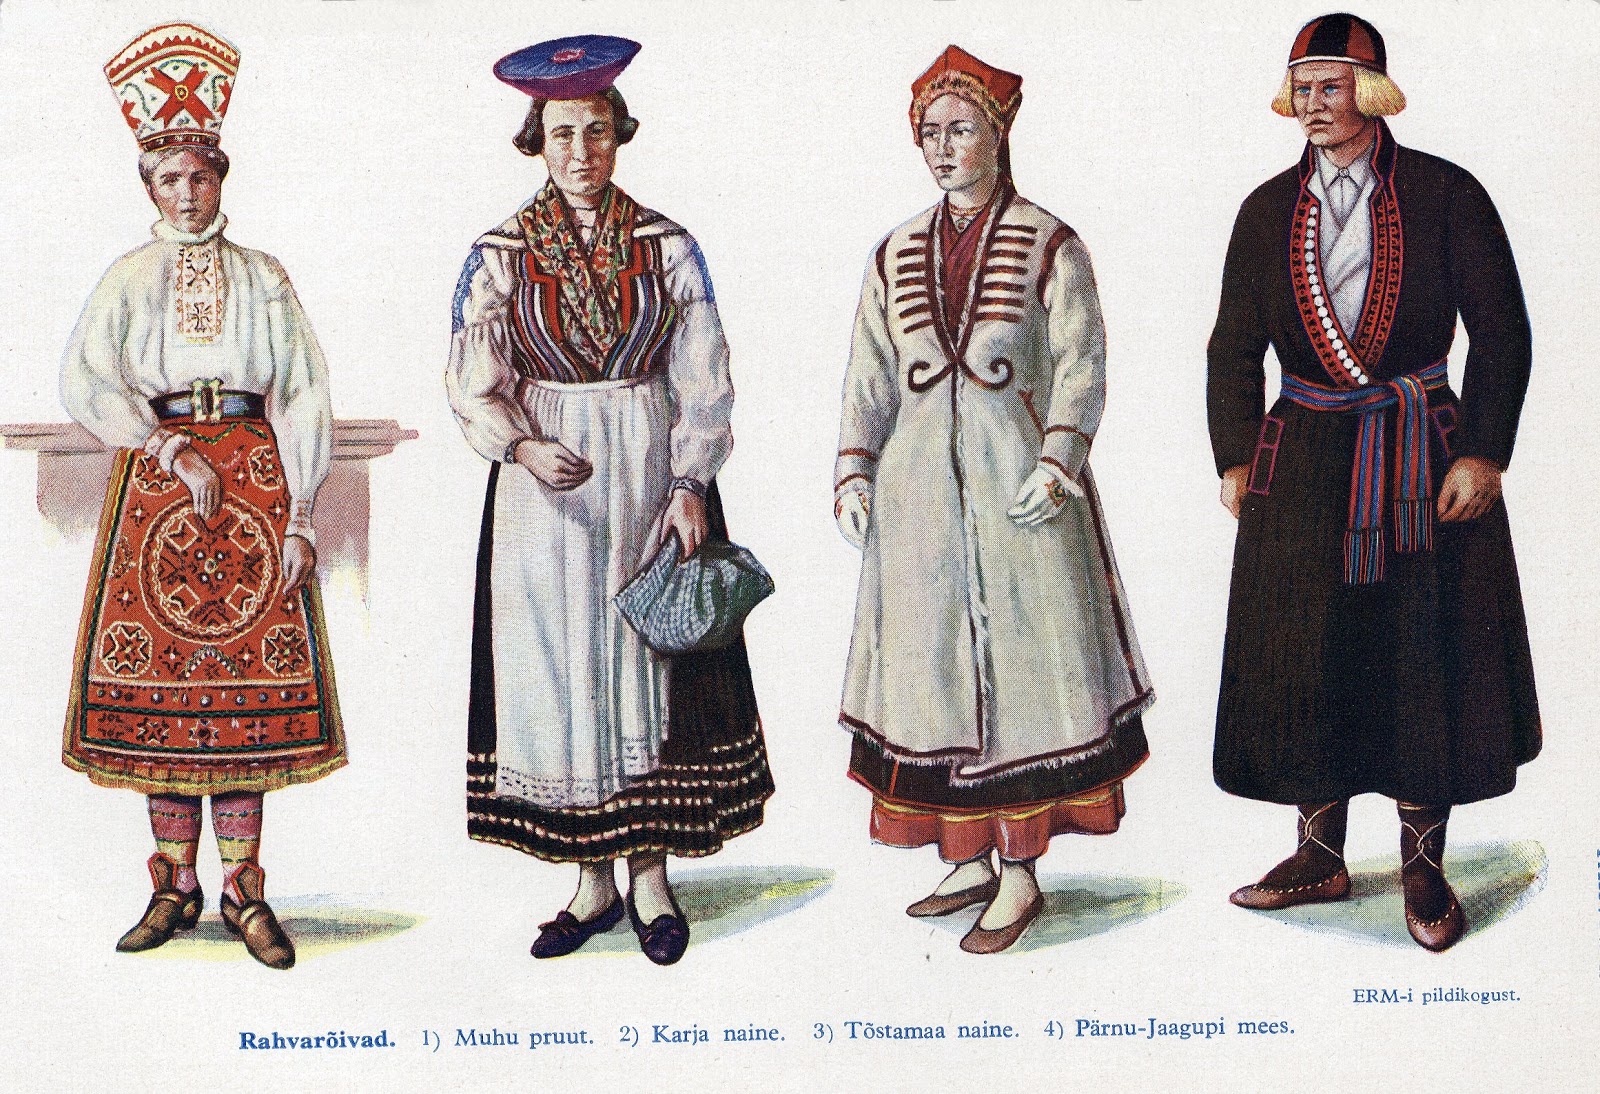 estonia facts fun facts about estonia interesting facts about estonia estonia culture facts facts about tallinn traditional costumes